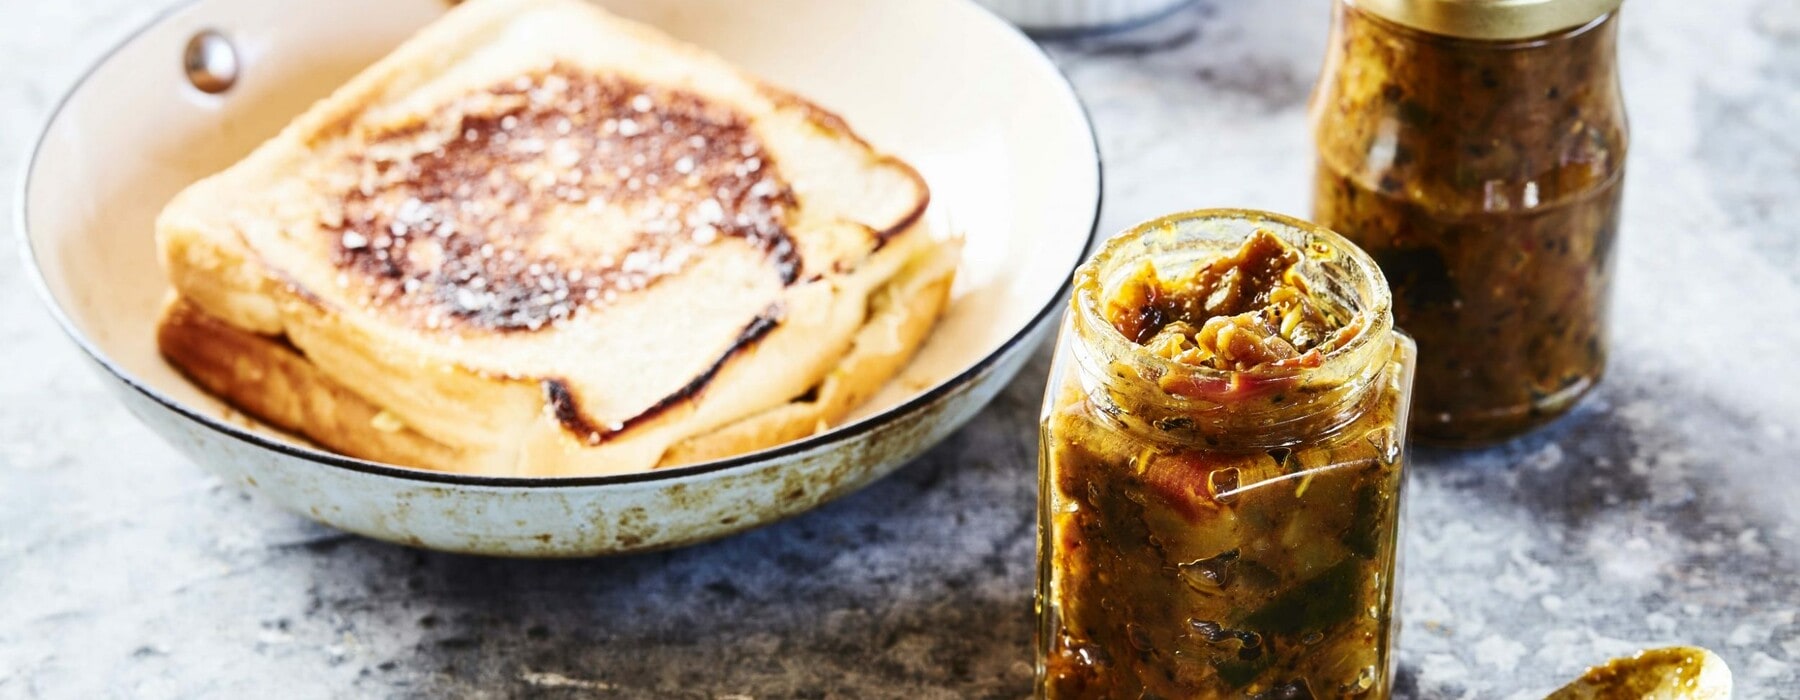 Spicy brinjal eggplant chutney in a jar and round plate